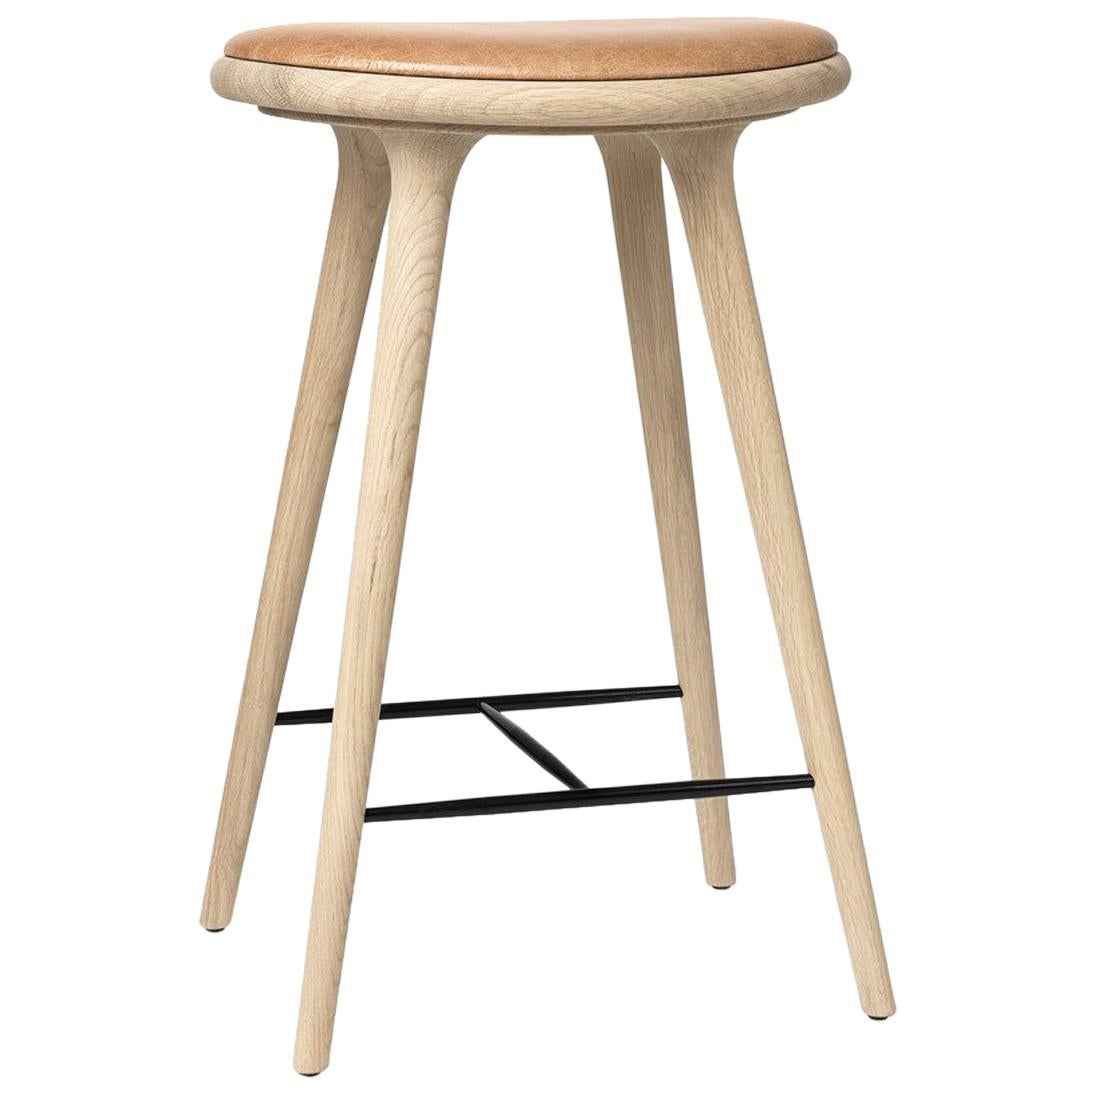 Counter Height High Stool, Natural Soap Oak Wood Leather Seat by Mater Design